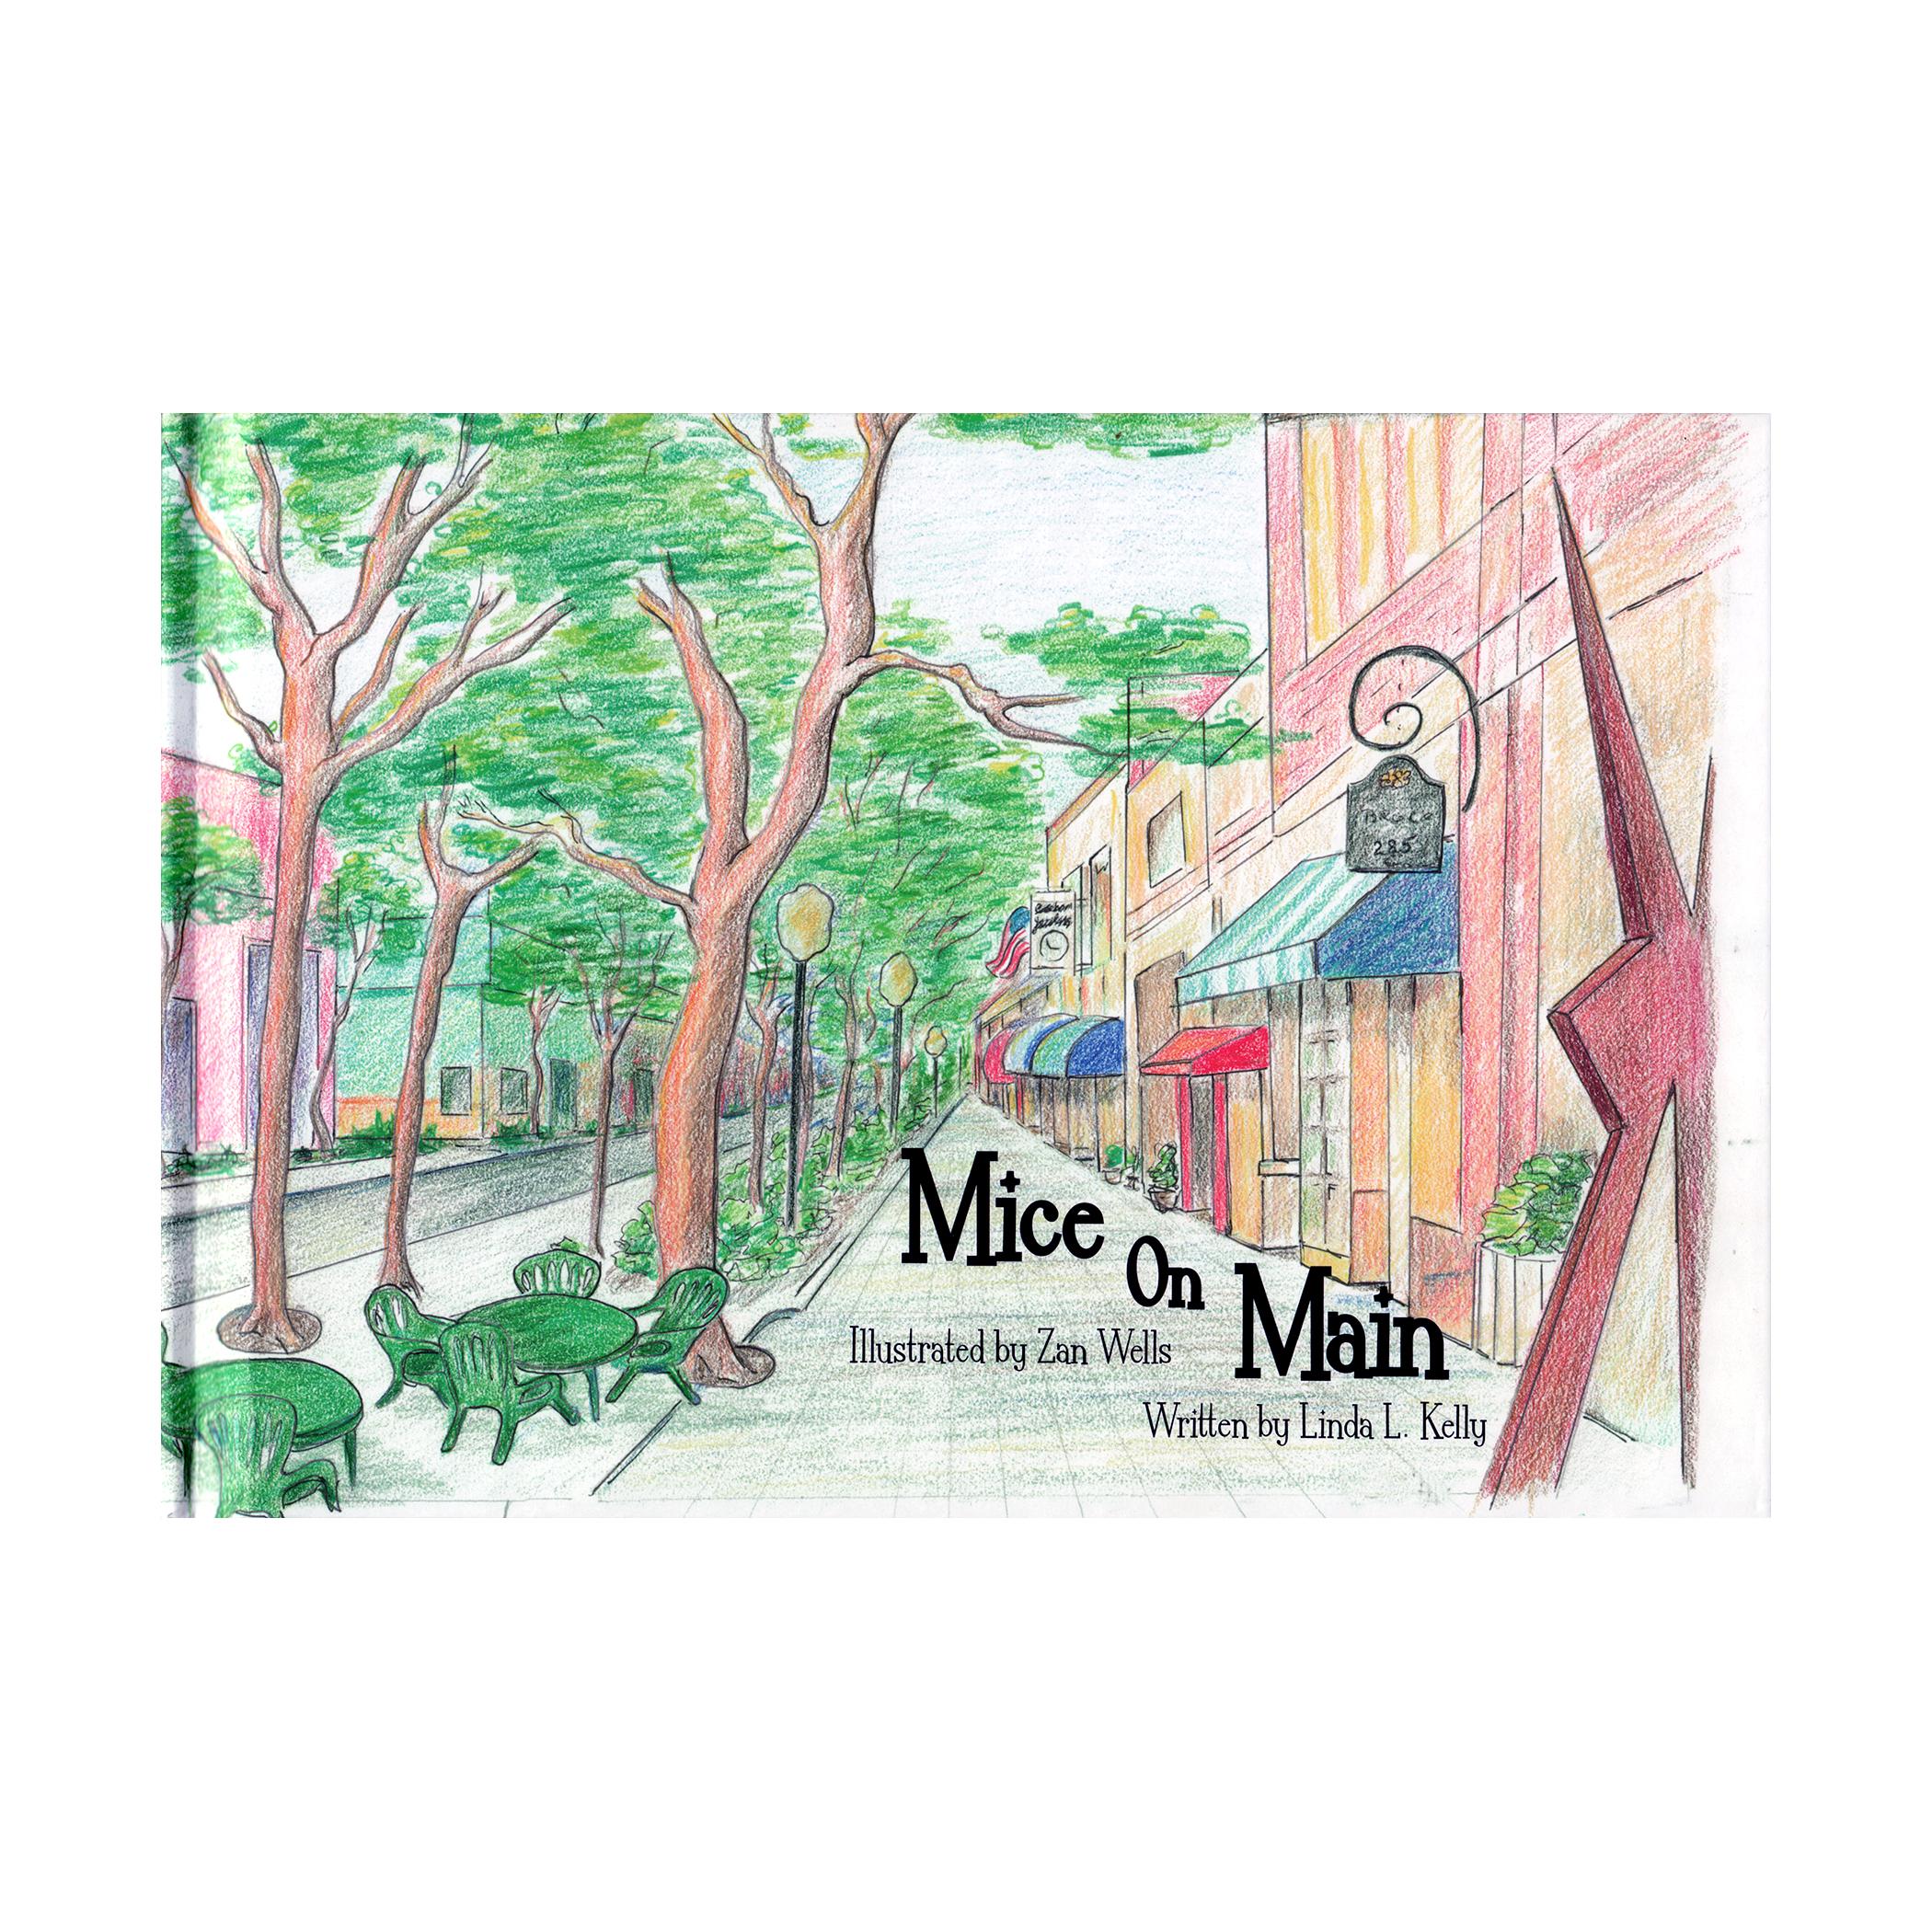  Mice On Main Story Book